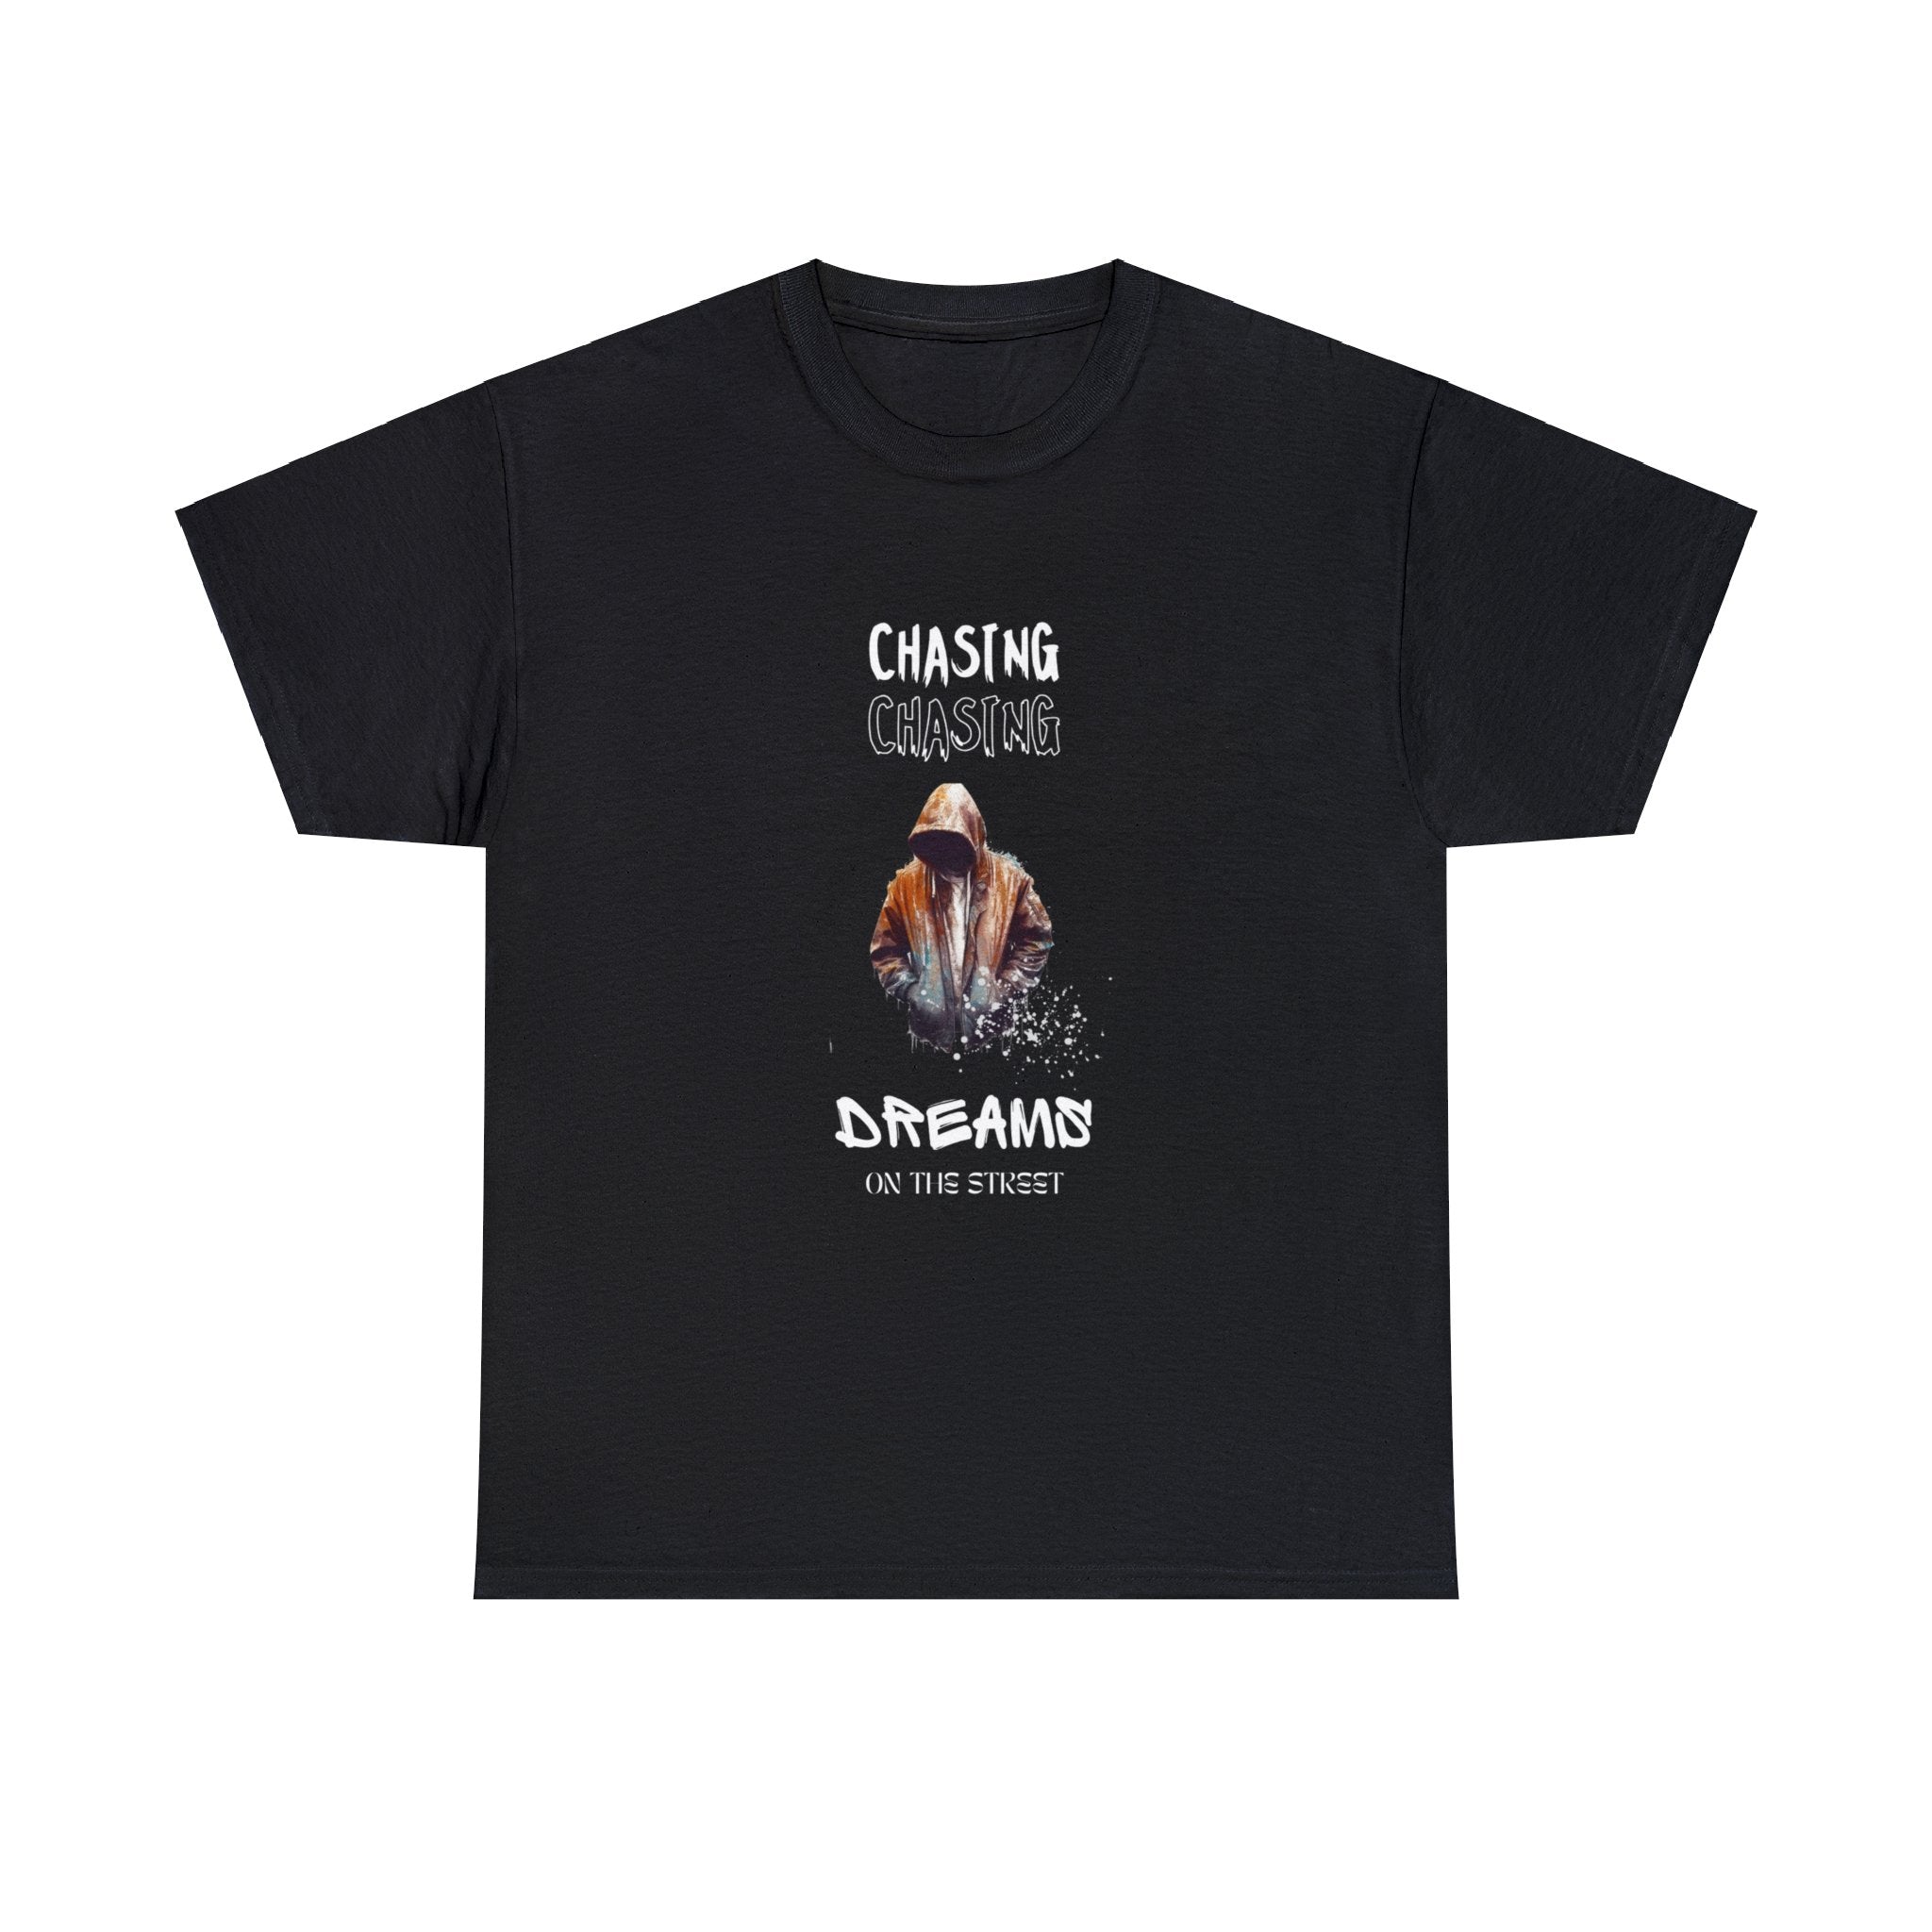 Chasing Dreams on the Street T-Shirt